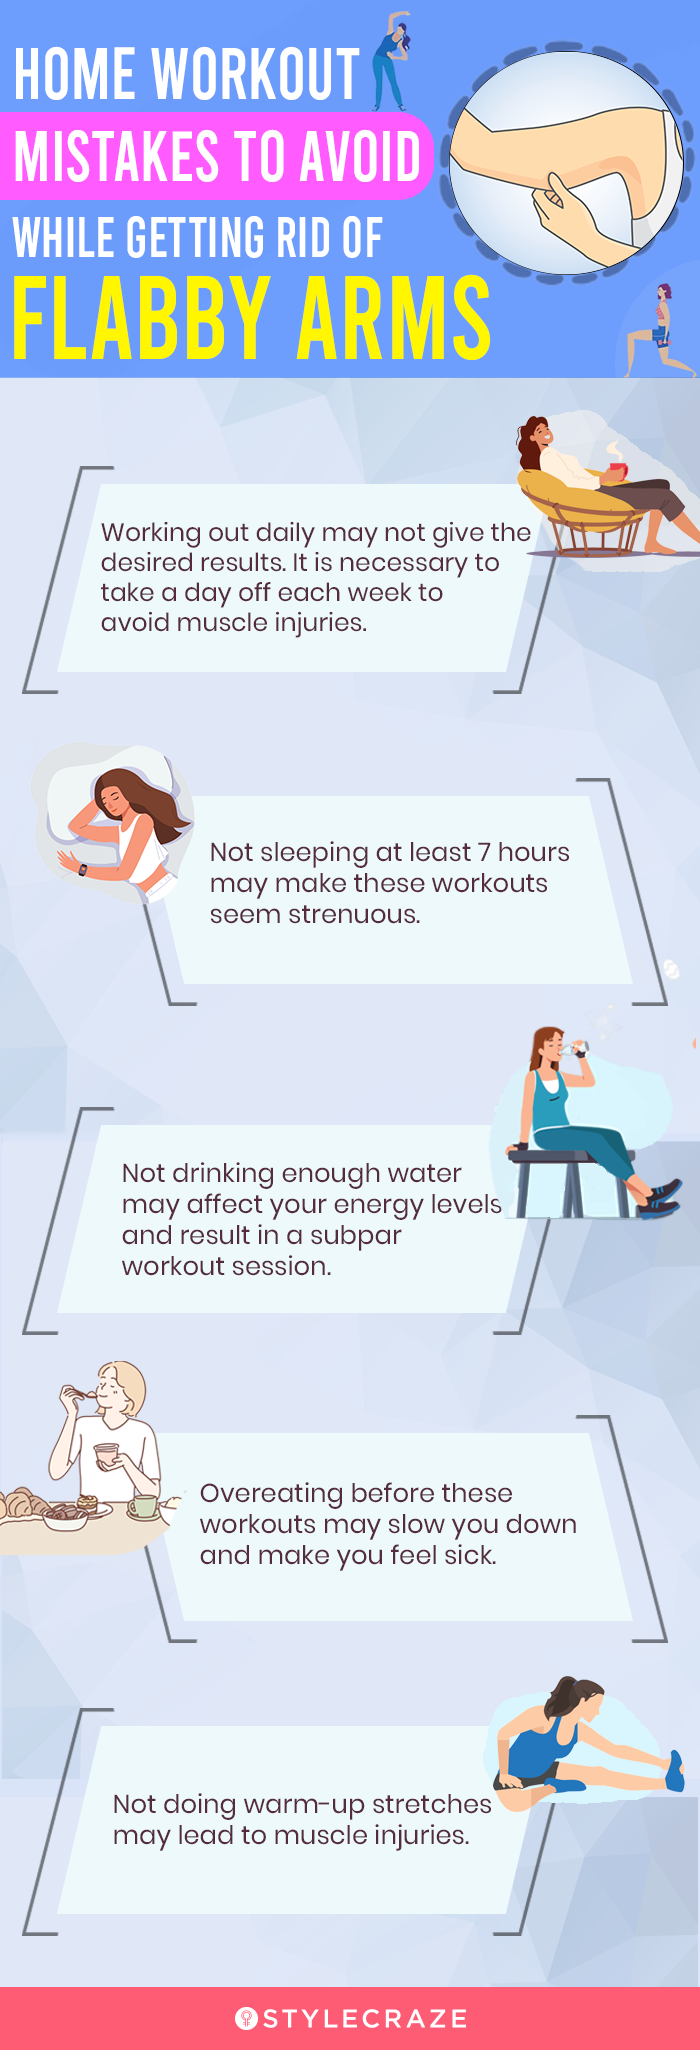 home workout mistakes to avoid while getting rid of flabby arms(infographic)